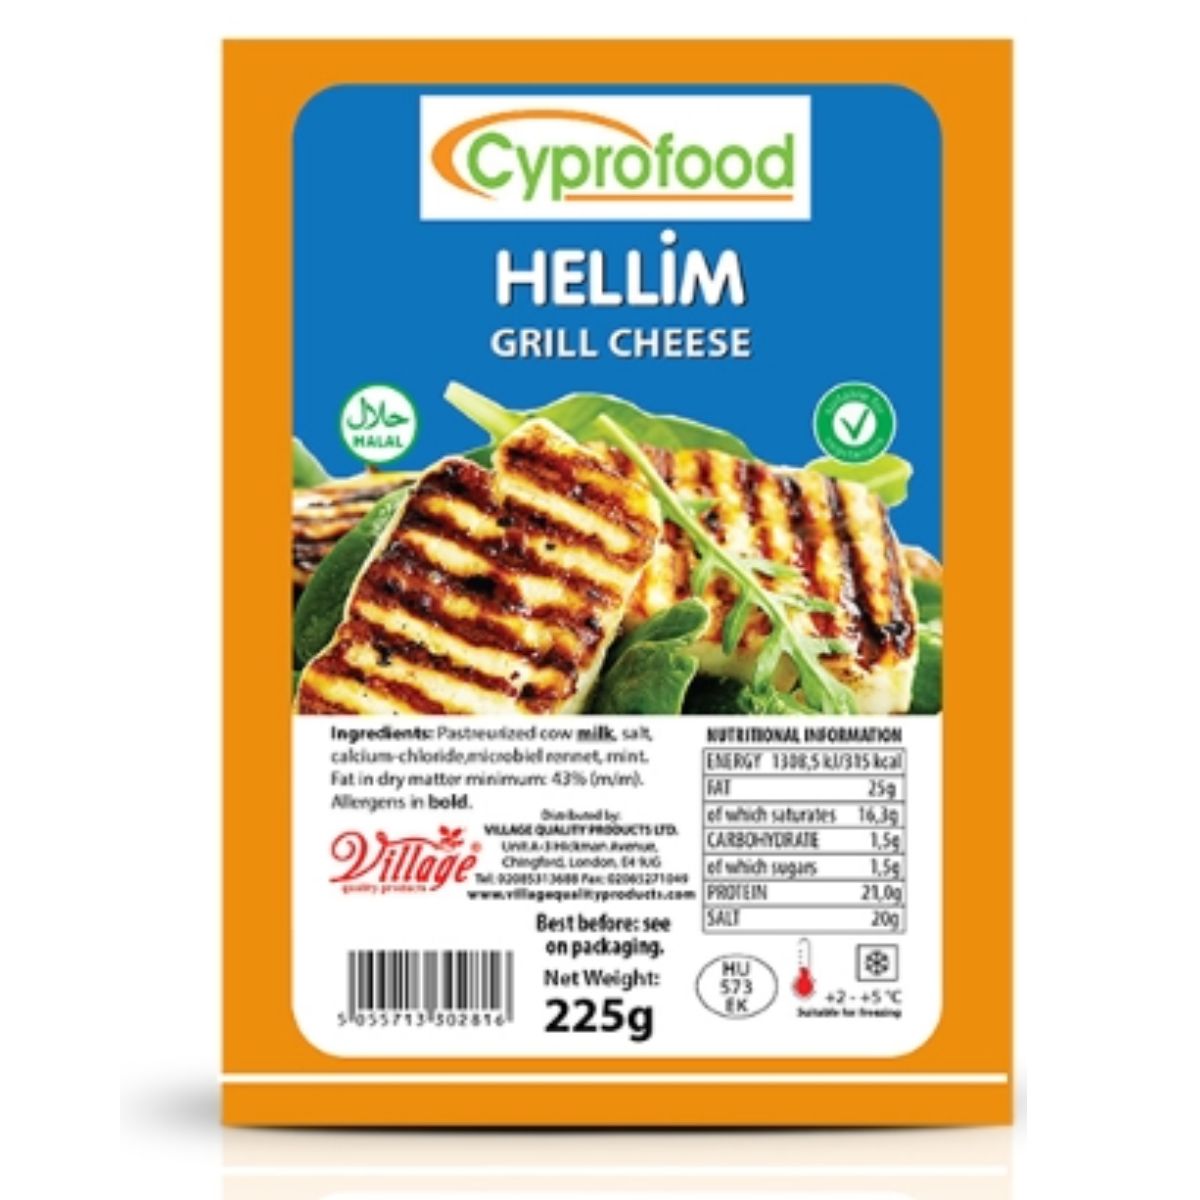 A bag of Cyprofood - Hellim Grill Cheese - 225g.